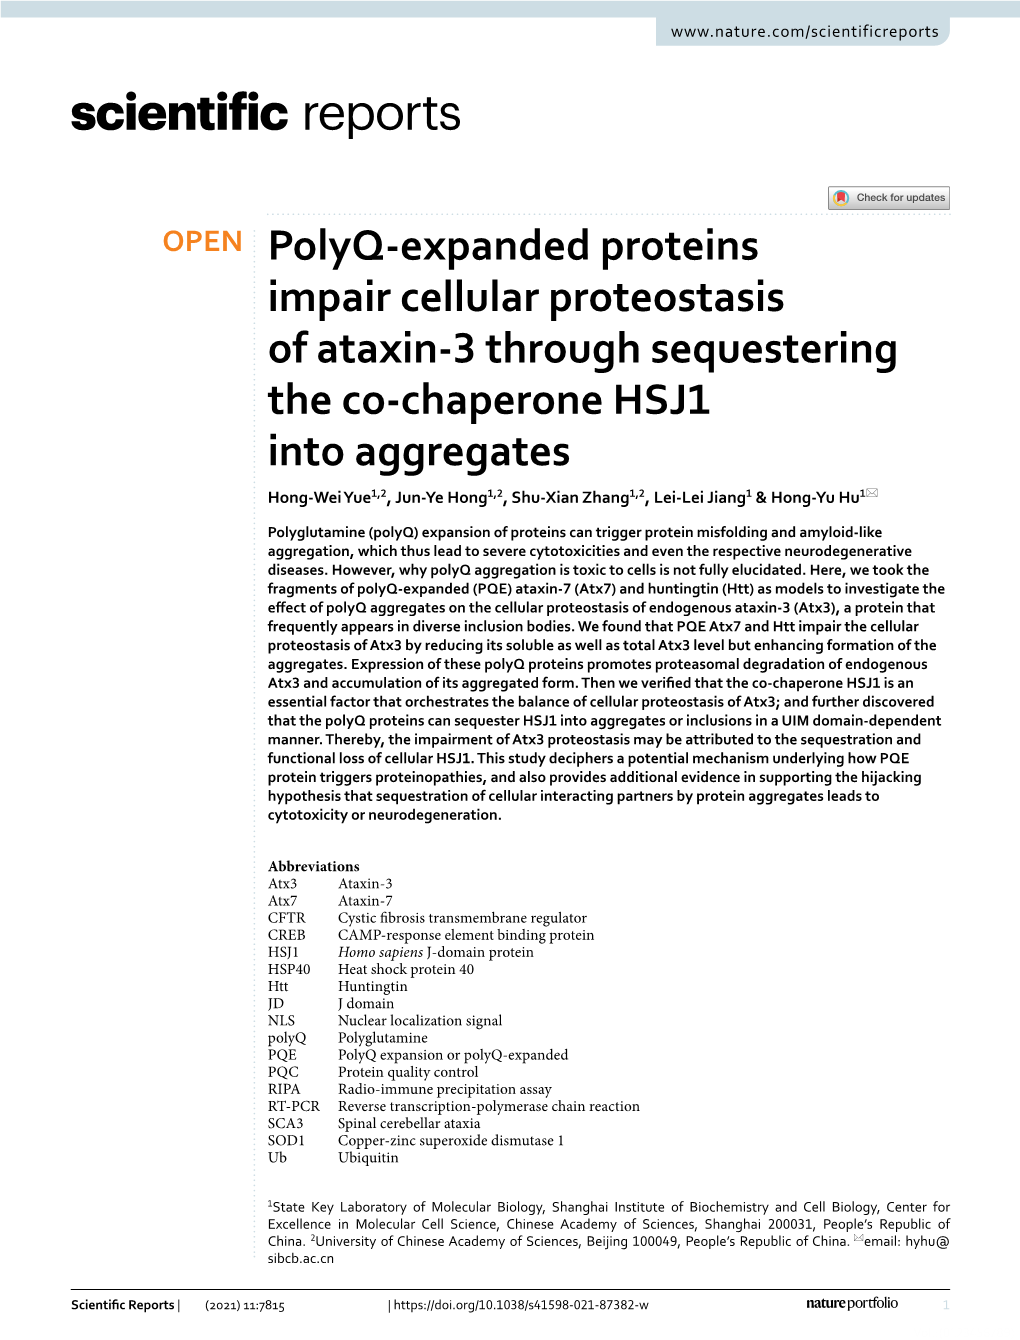 Polyq-Expanded Proteins Impair Cellular Proteostasis of Ataxin-3